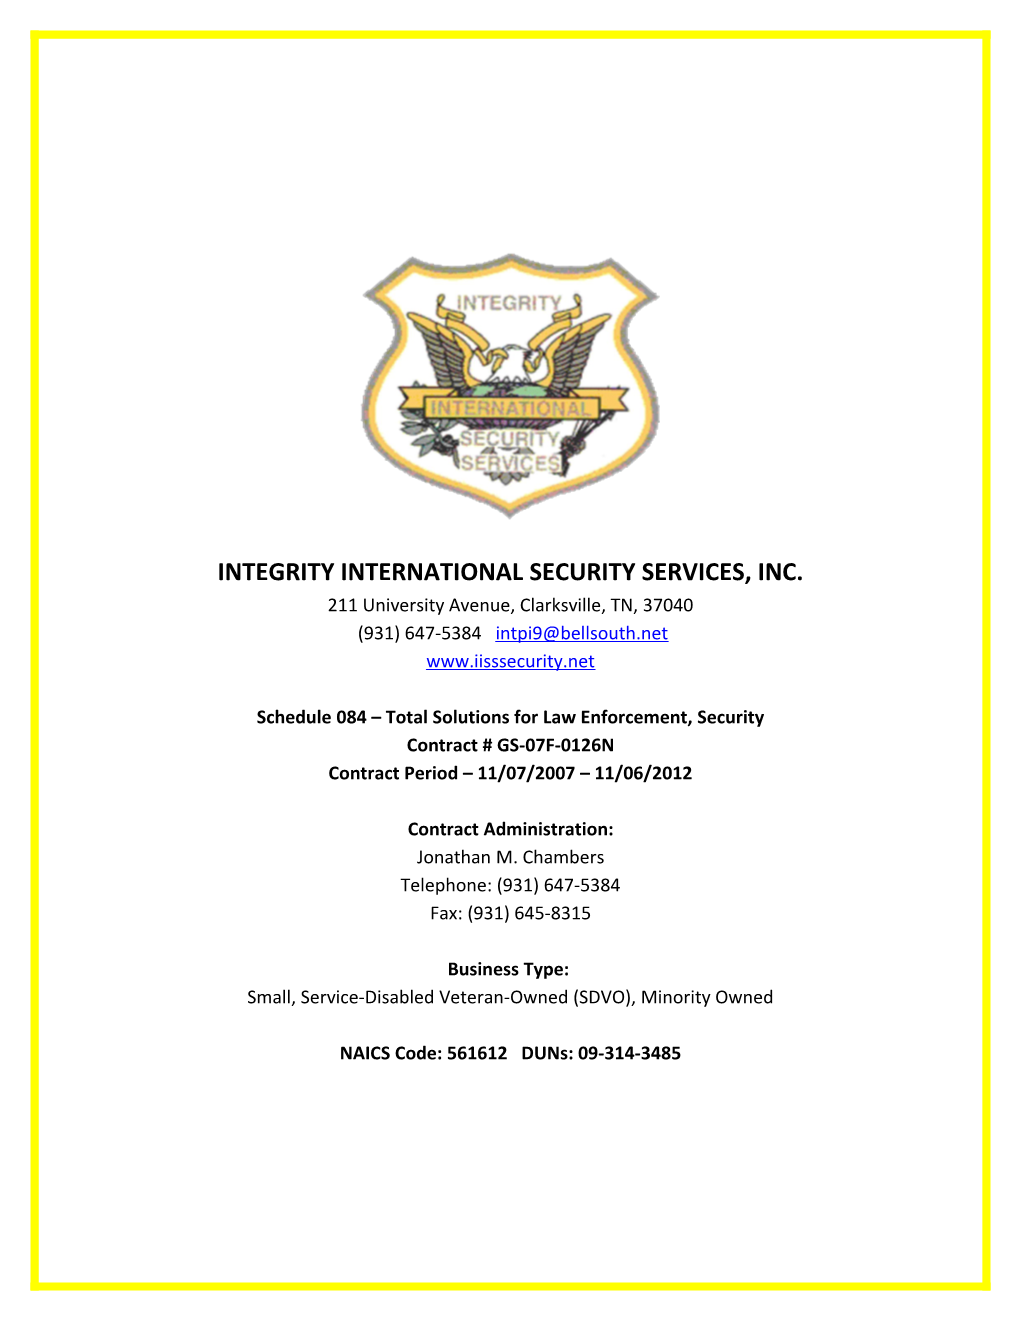 Integrity International Security Services, Inc